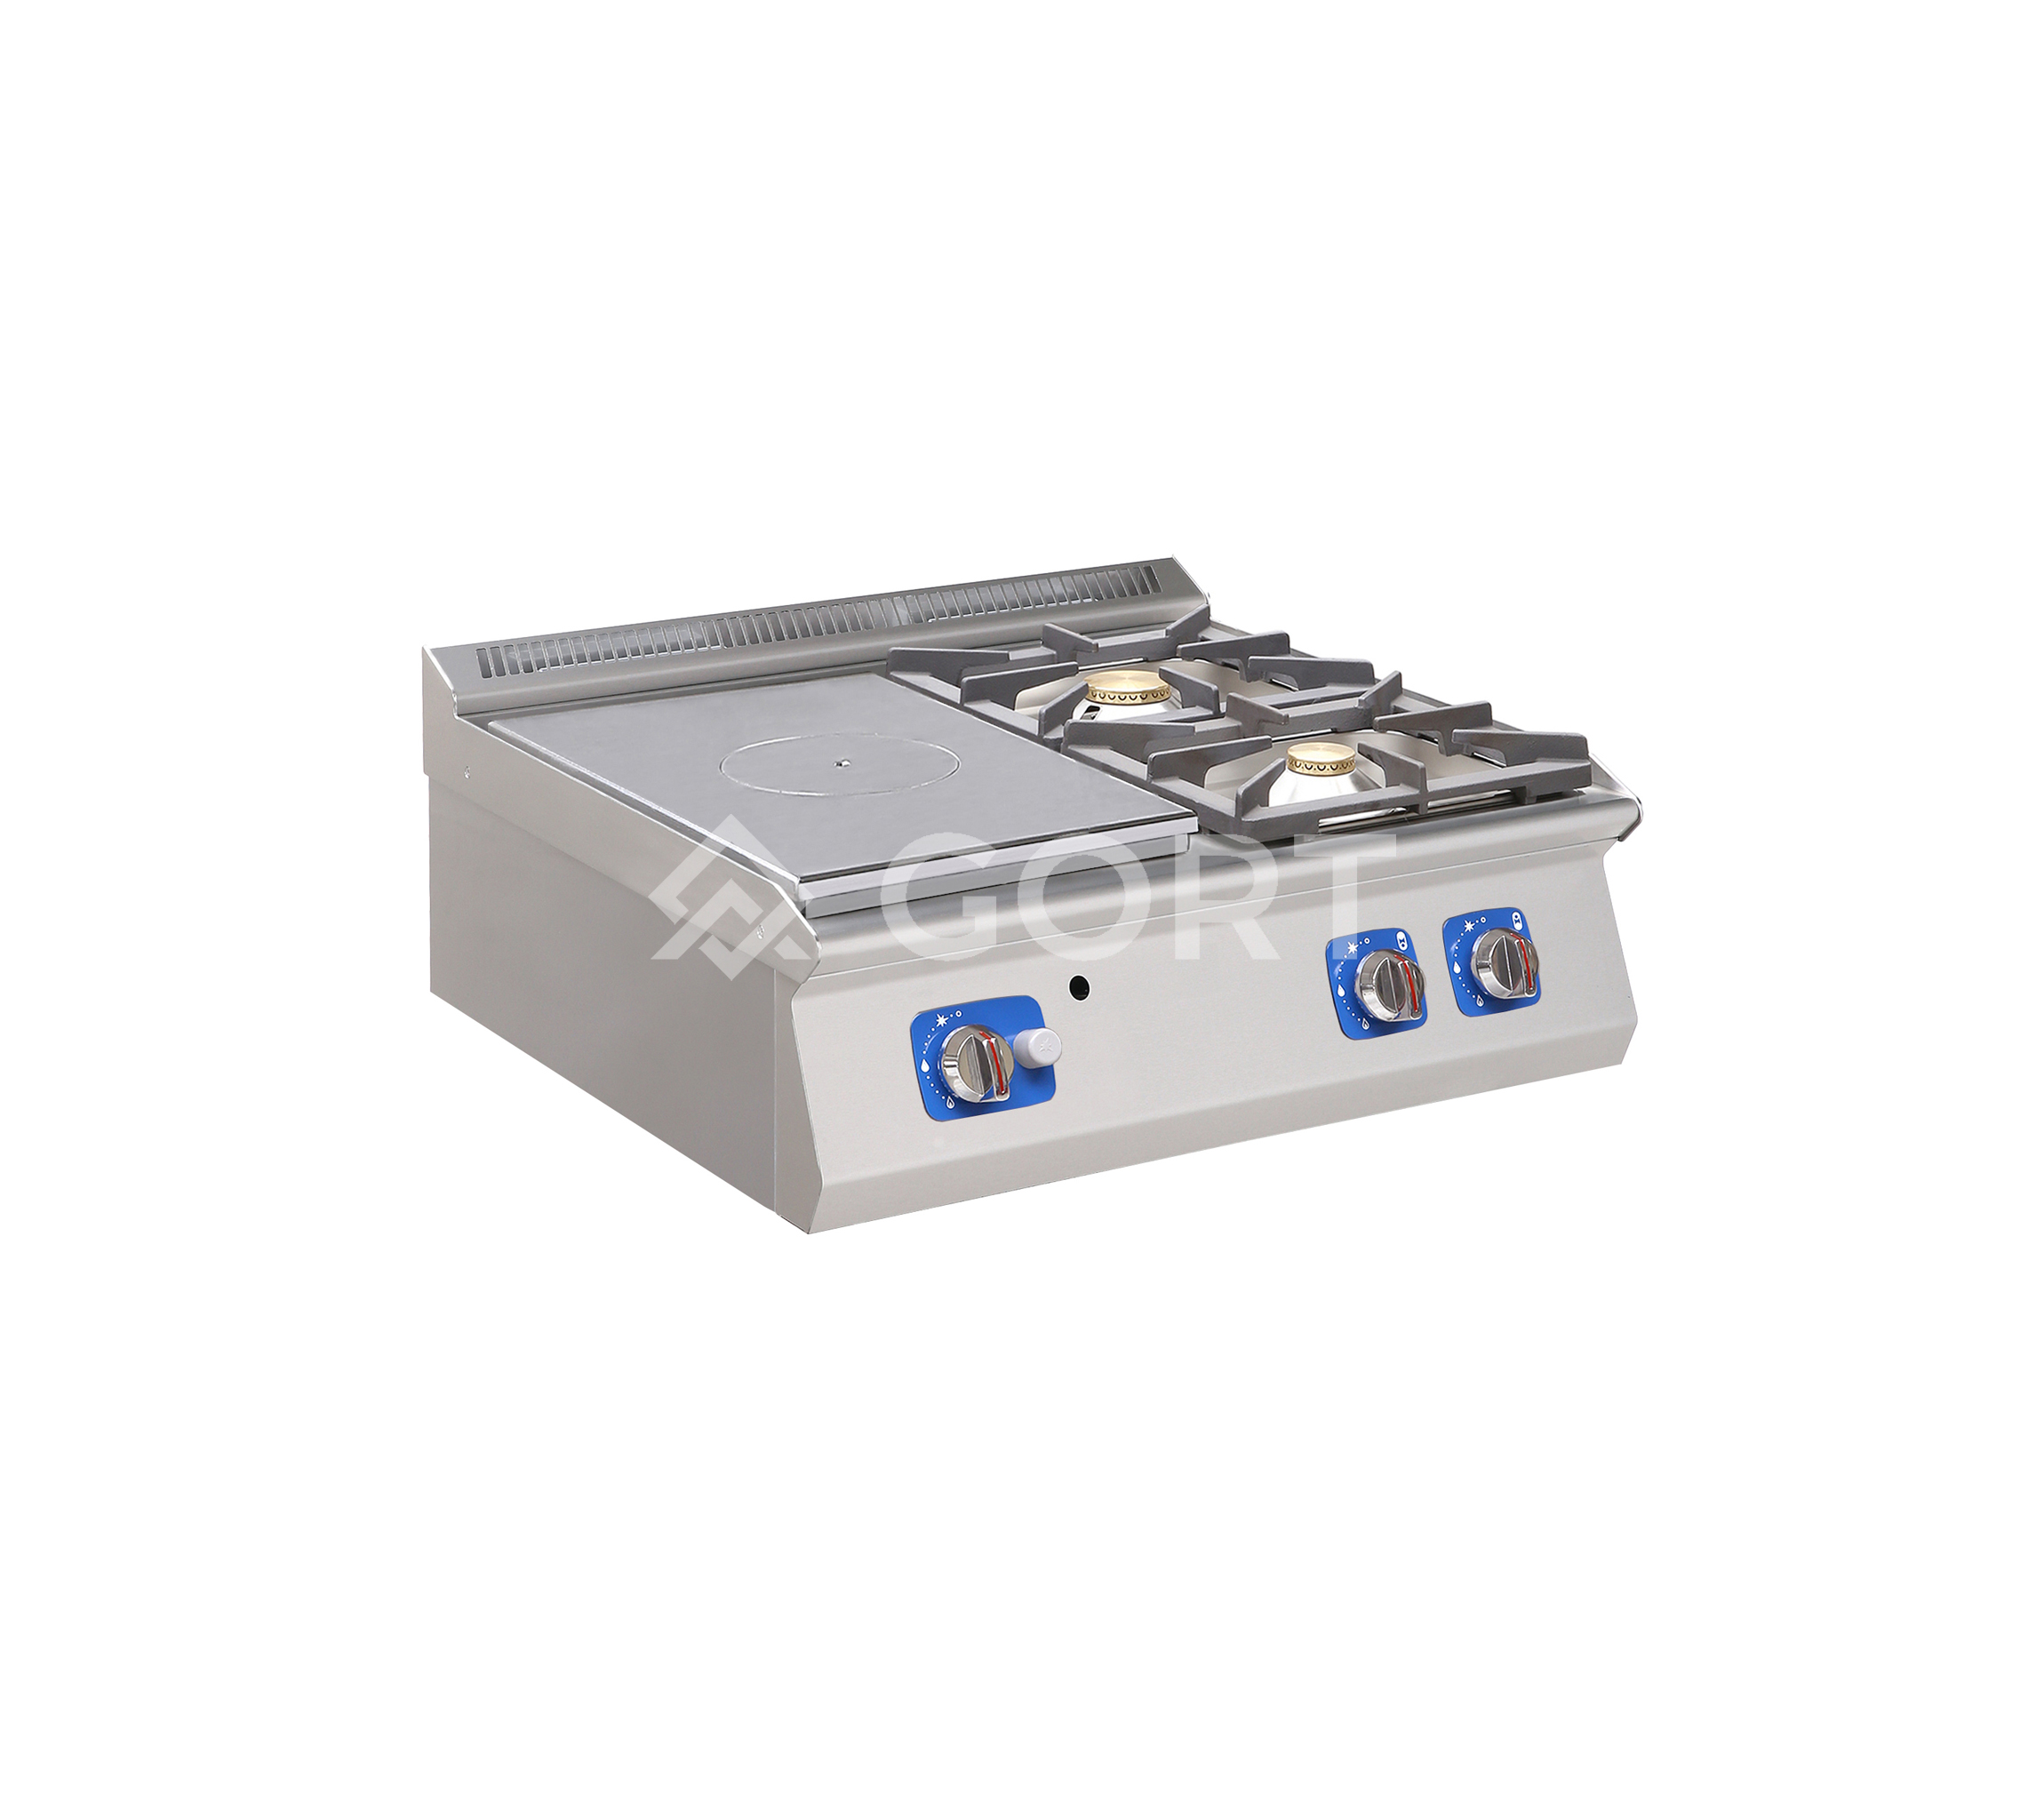 Gas solid top with 2 burner gas cooking top